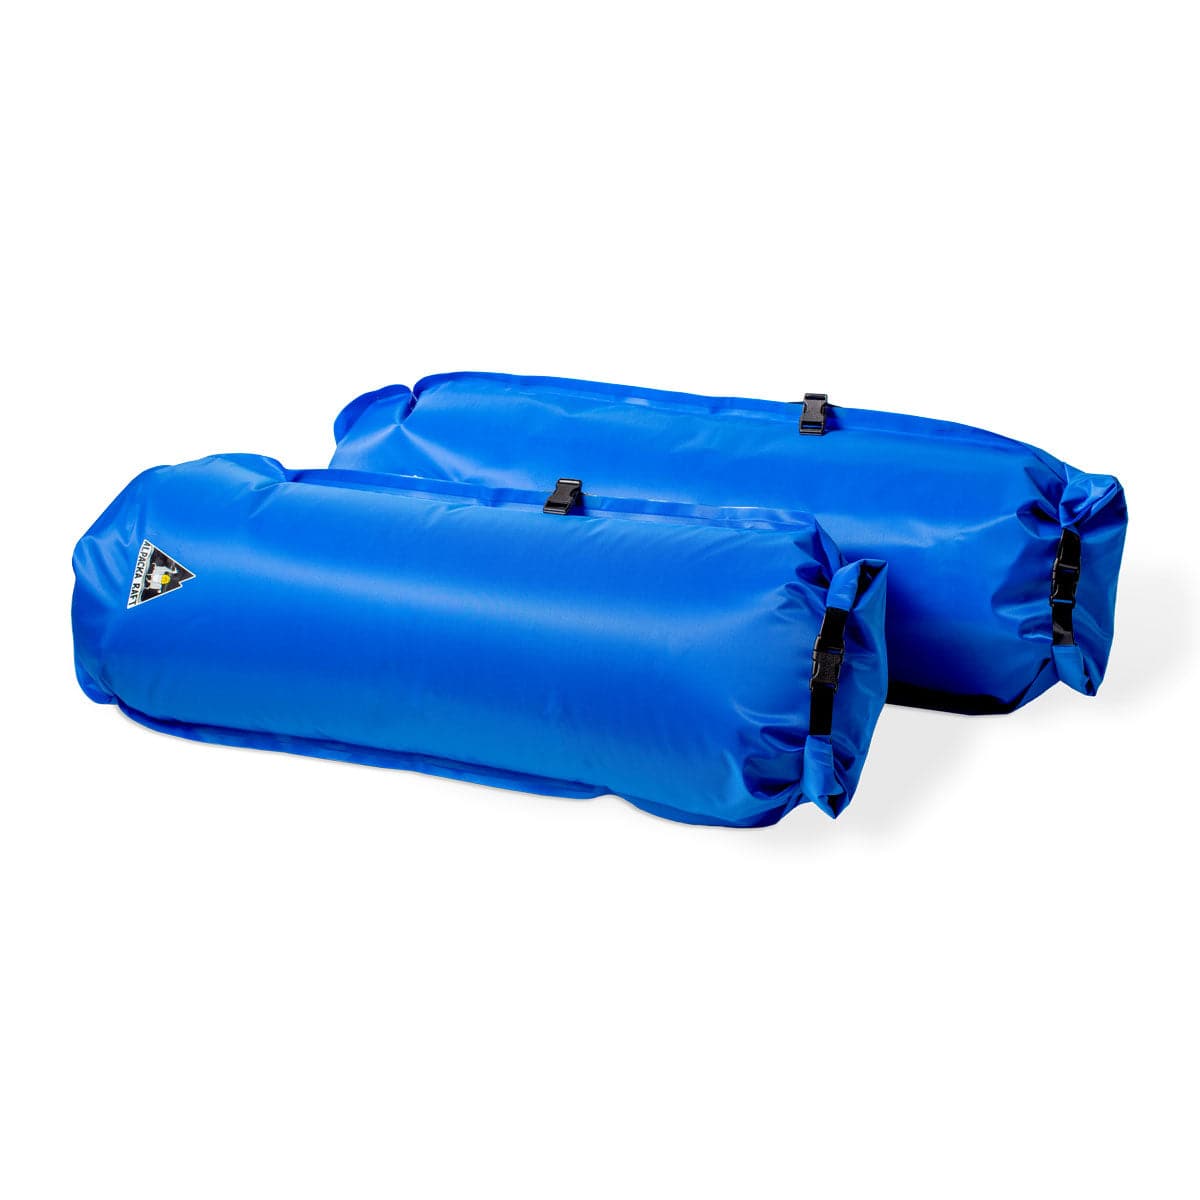 Featuring the Cargo Fly Roll Top Internal Dry Bags pack raft accessories manufactured by Alpacka shown here from one angle.